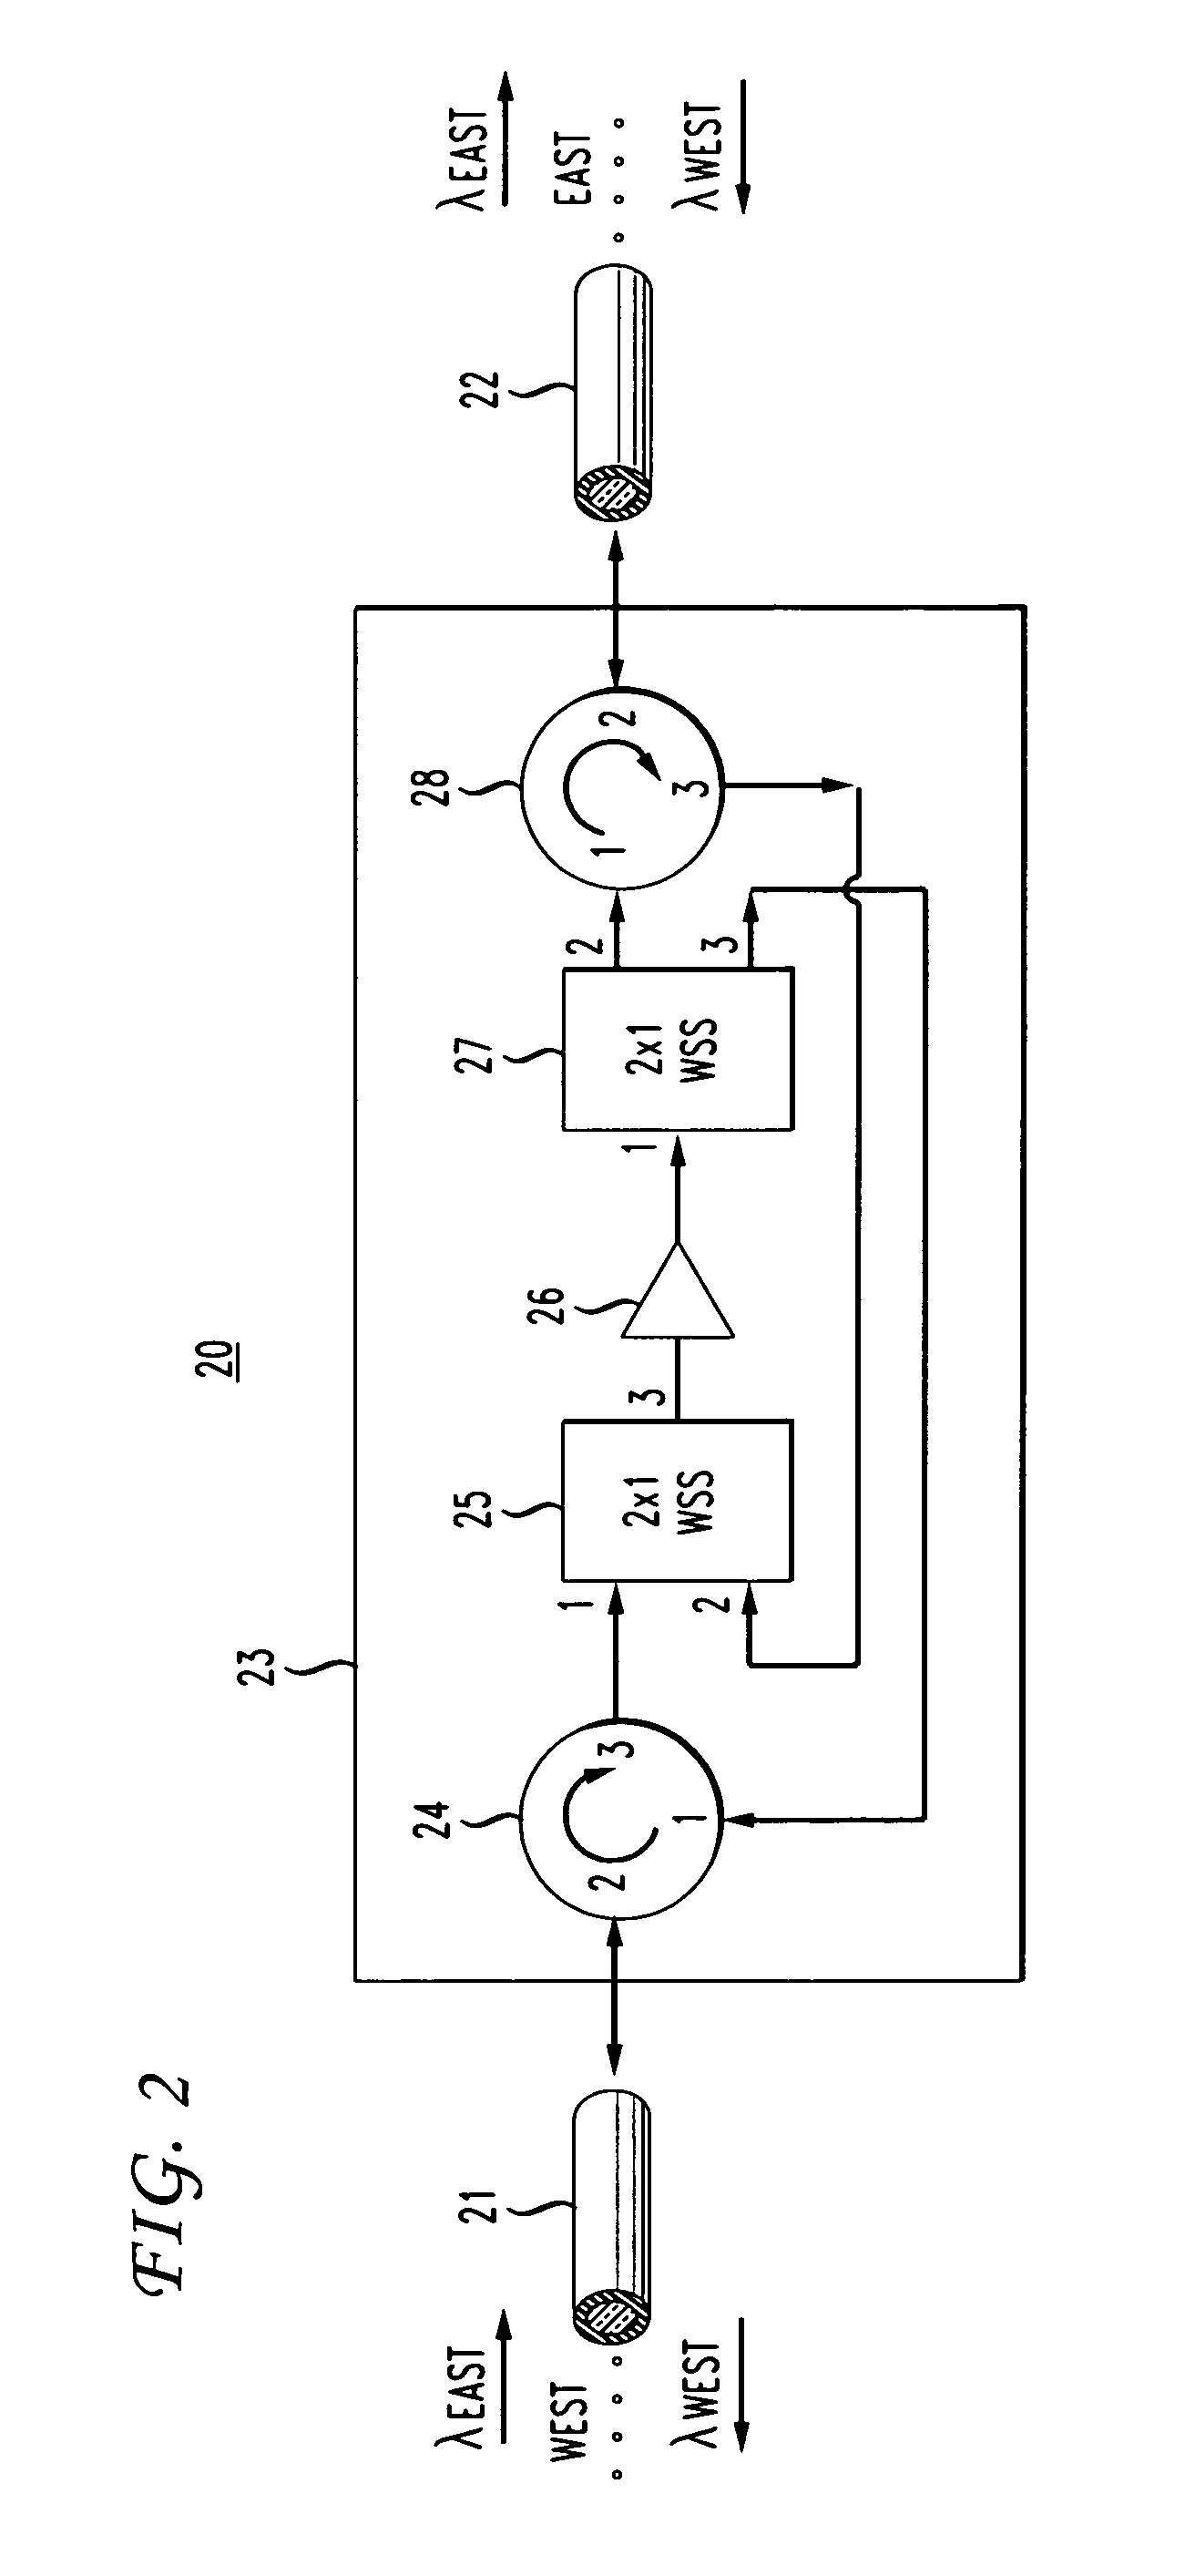 Dynamic allocation of bandwidth in a bidirectional optical transmission system